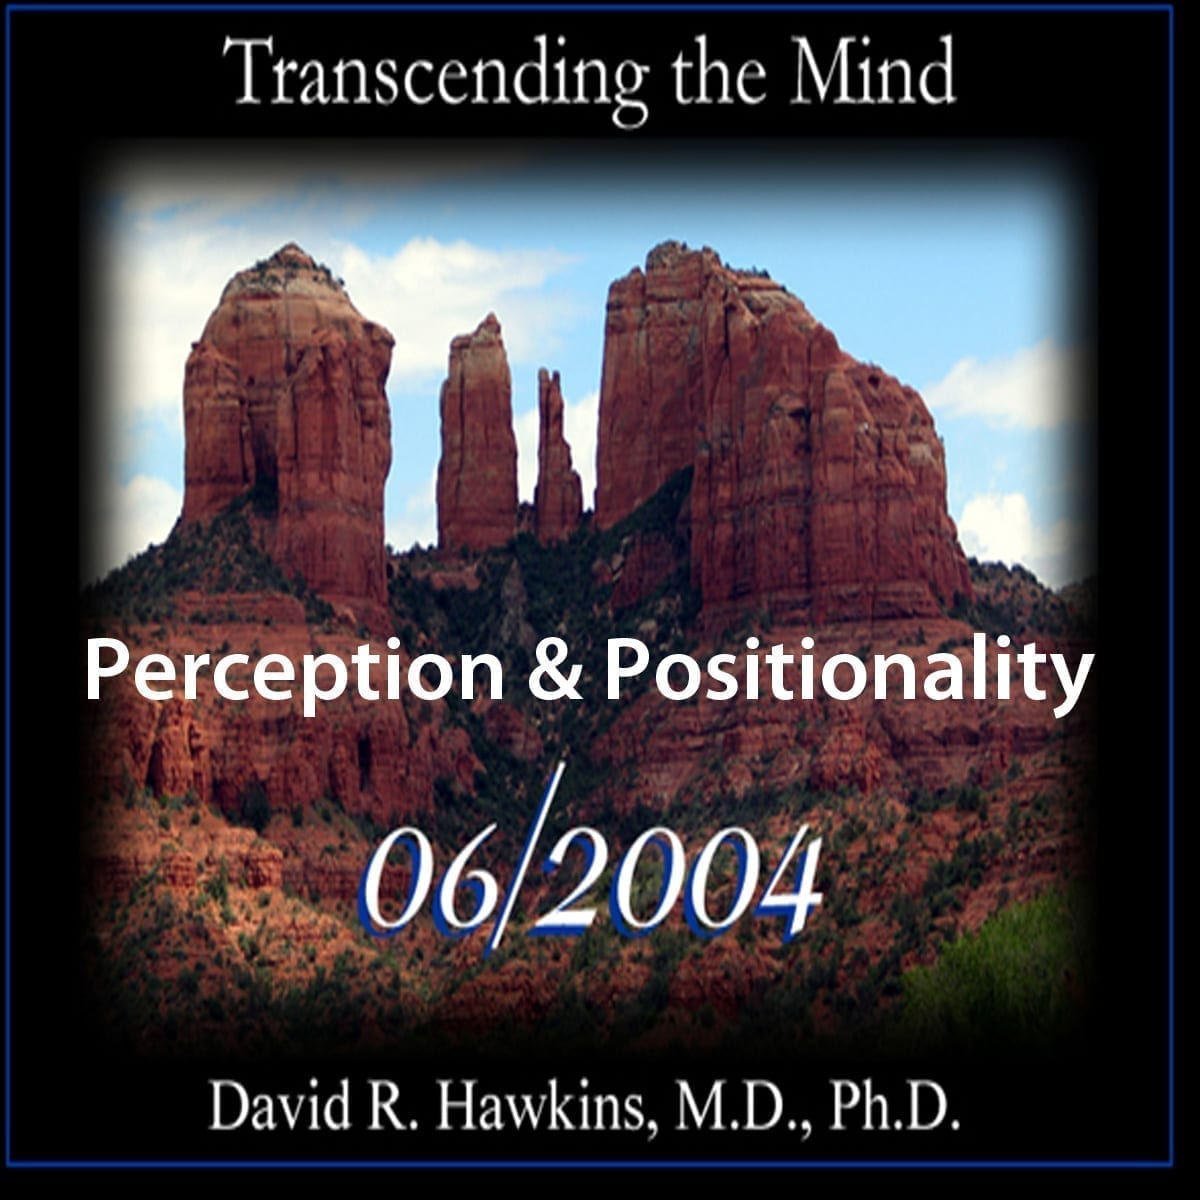 Perception and Positionality (Jun 2004)